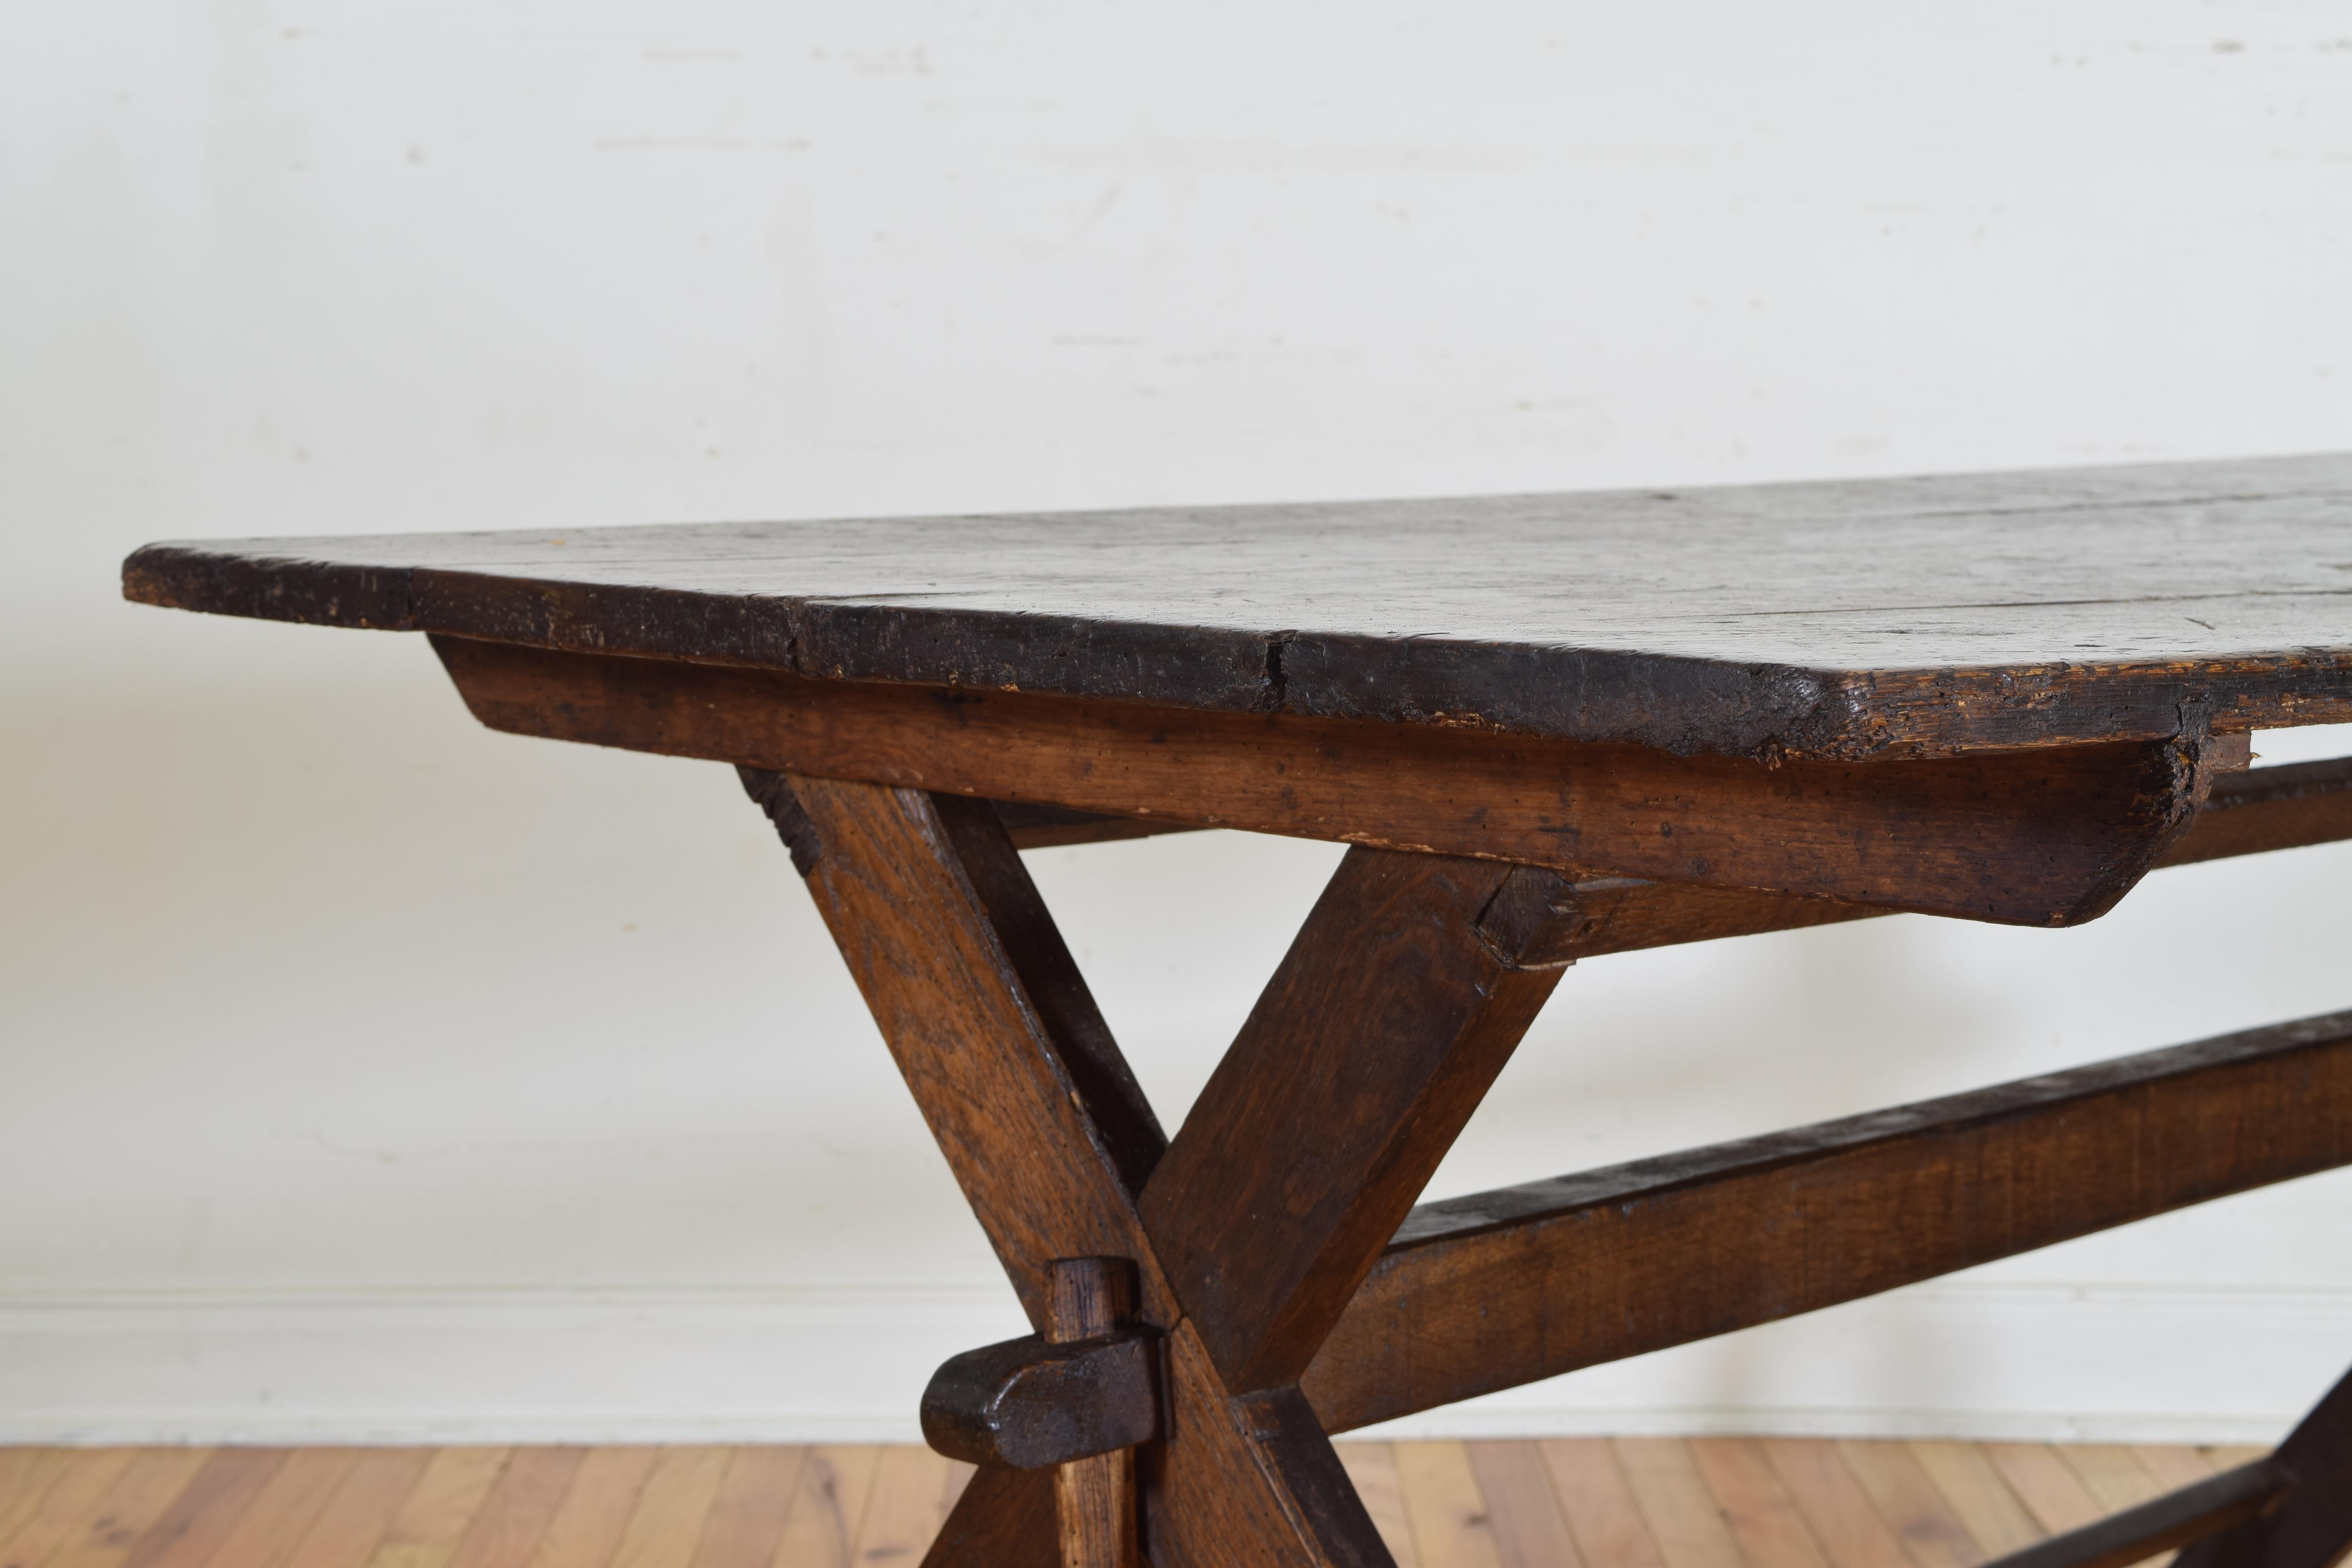 Late 19th Century N. Italian or Austrian Pinewood Trestle-Form Campaign-Style Table, circa 1870